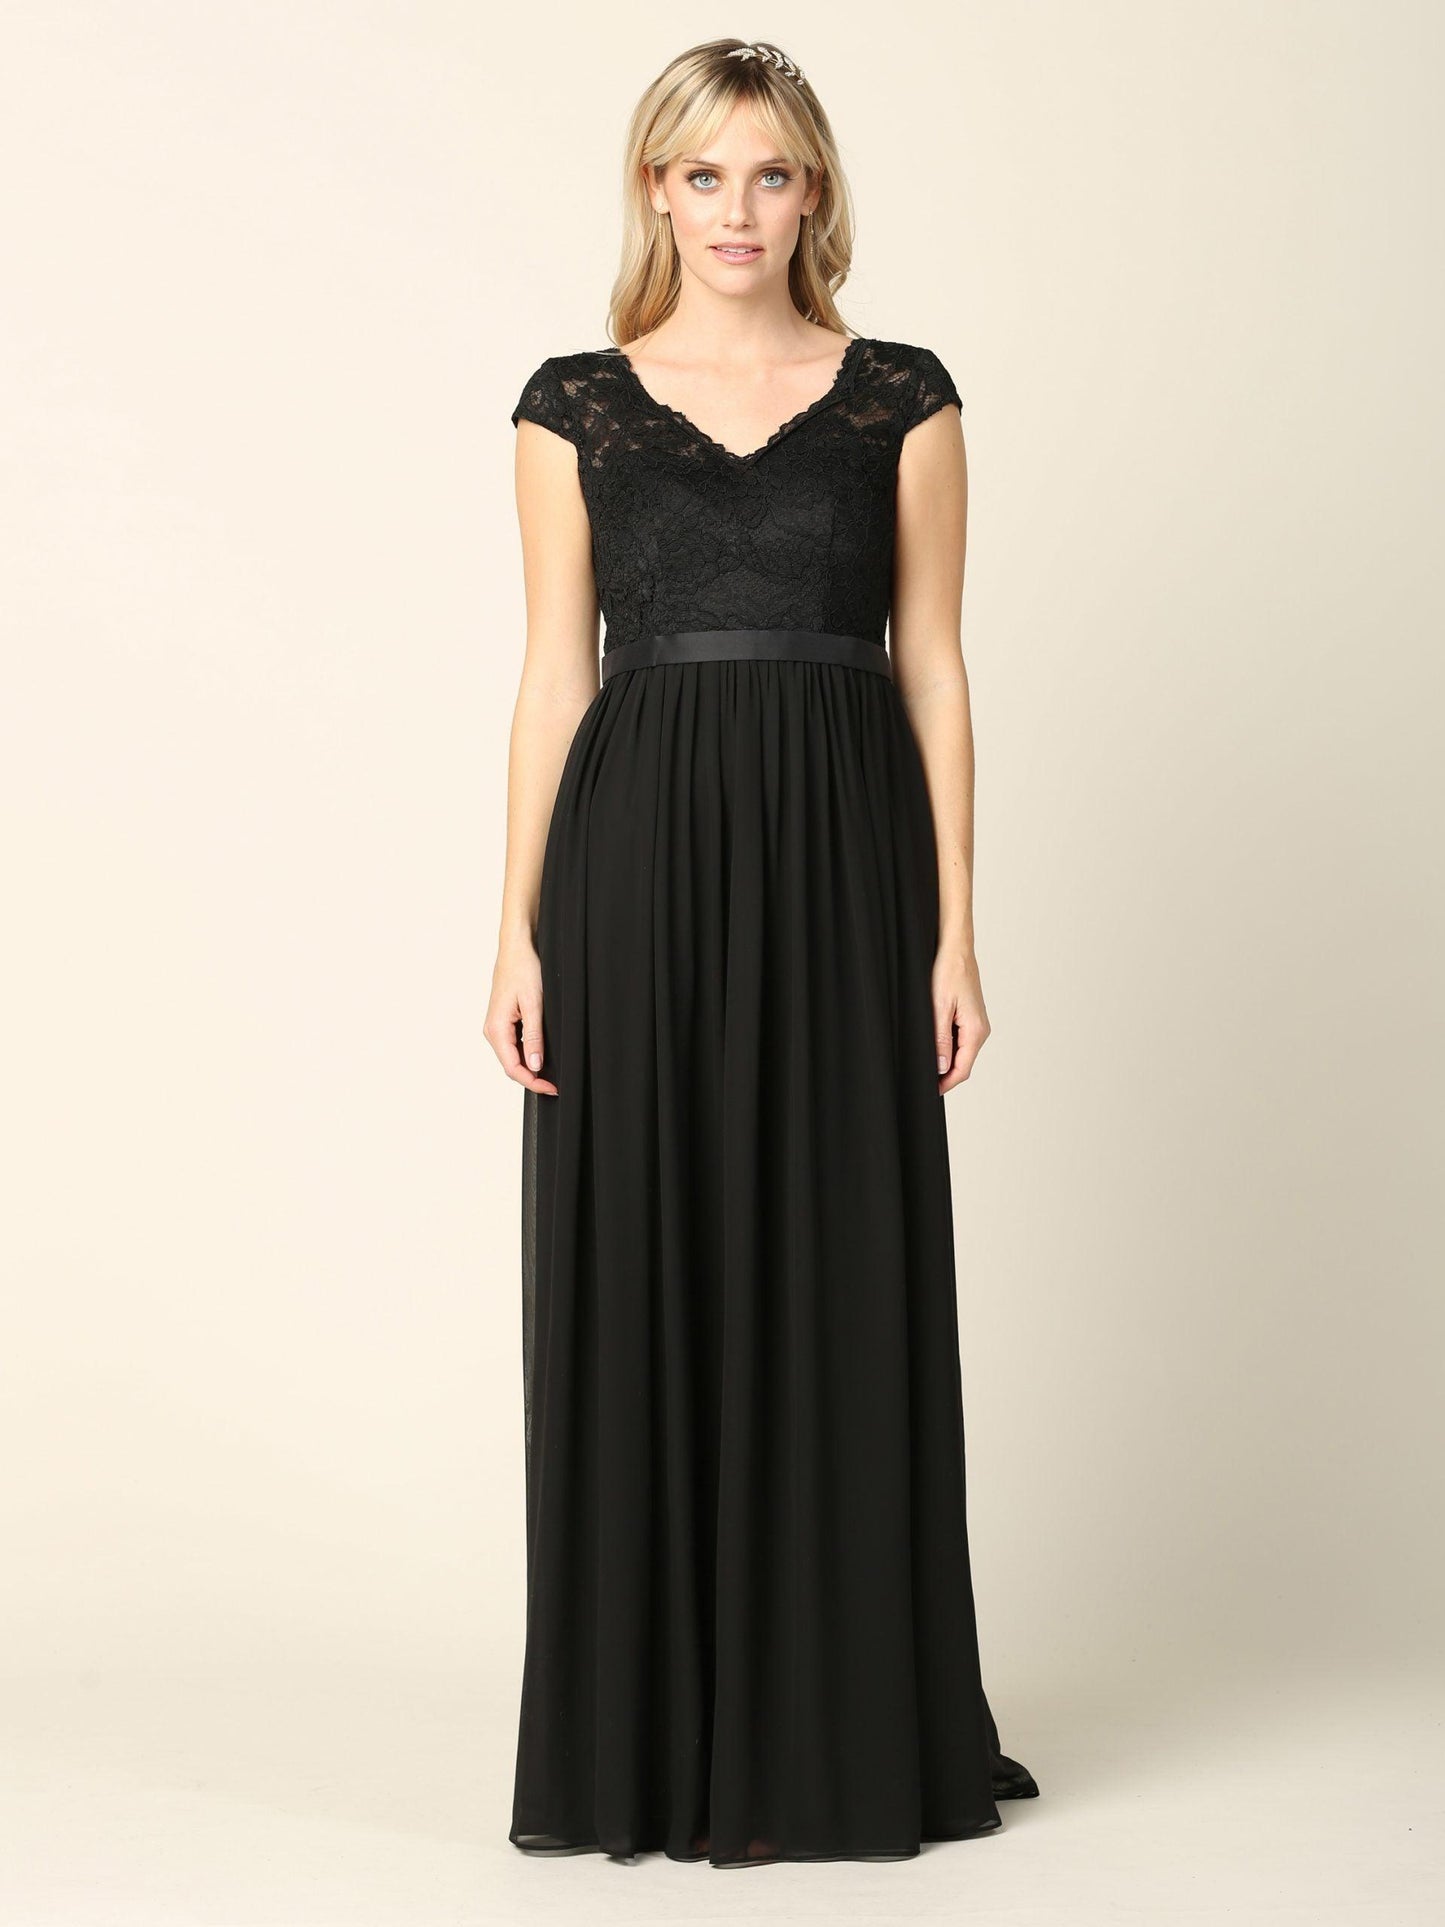 Long Cap Sleeve Mother of the Bride Formal Dress - The Dress Outlet